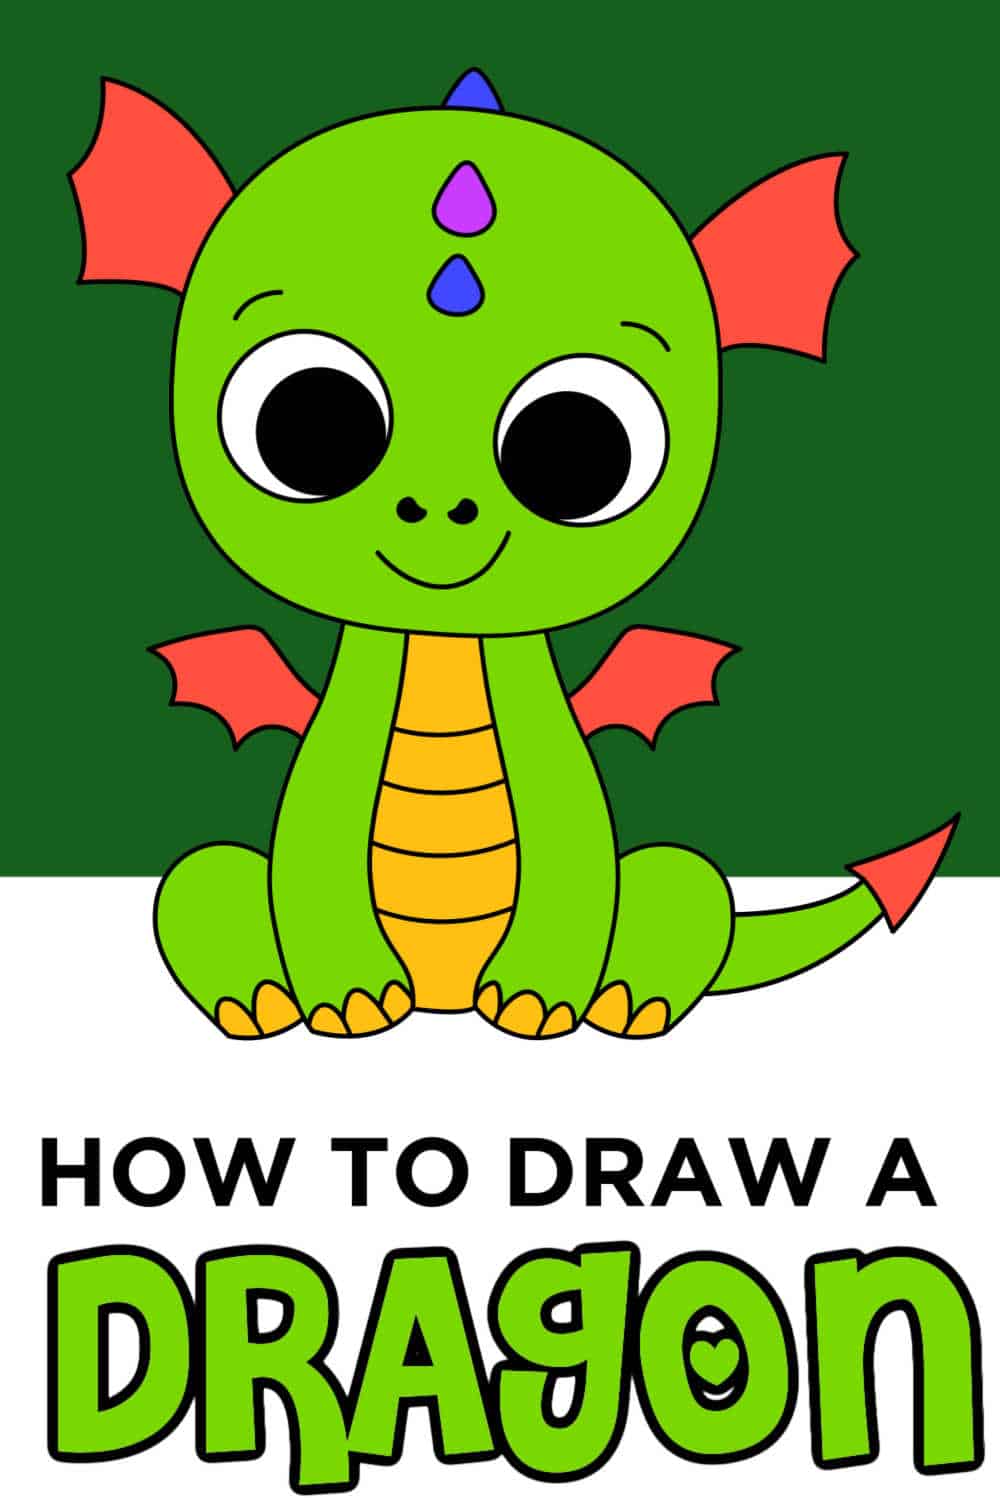 How To Draw A Penguin: Simple and Easy Kids Drawing - Bright Star Kids-saigonsouth.com.vn